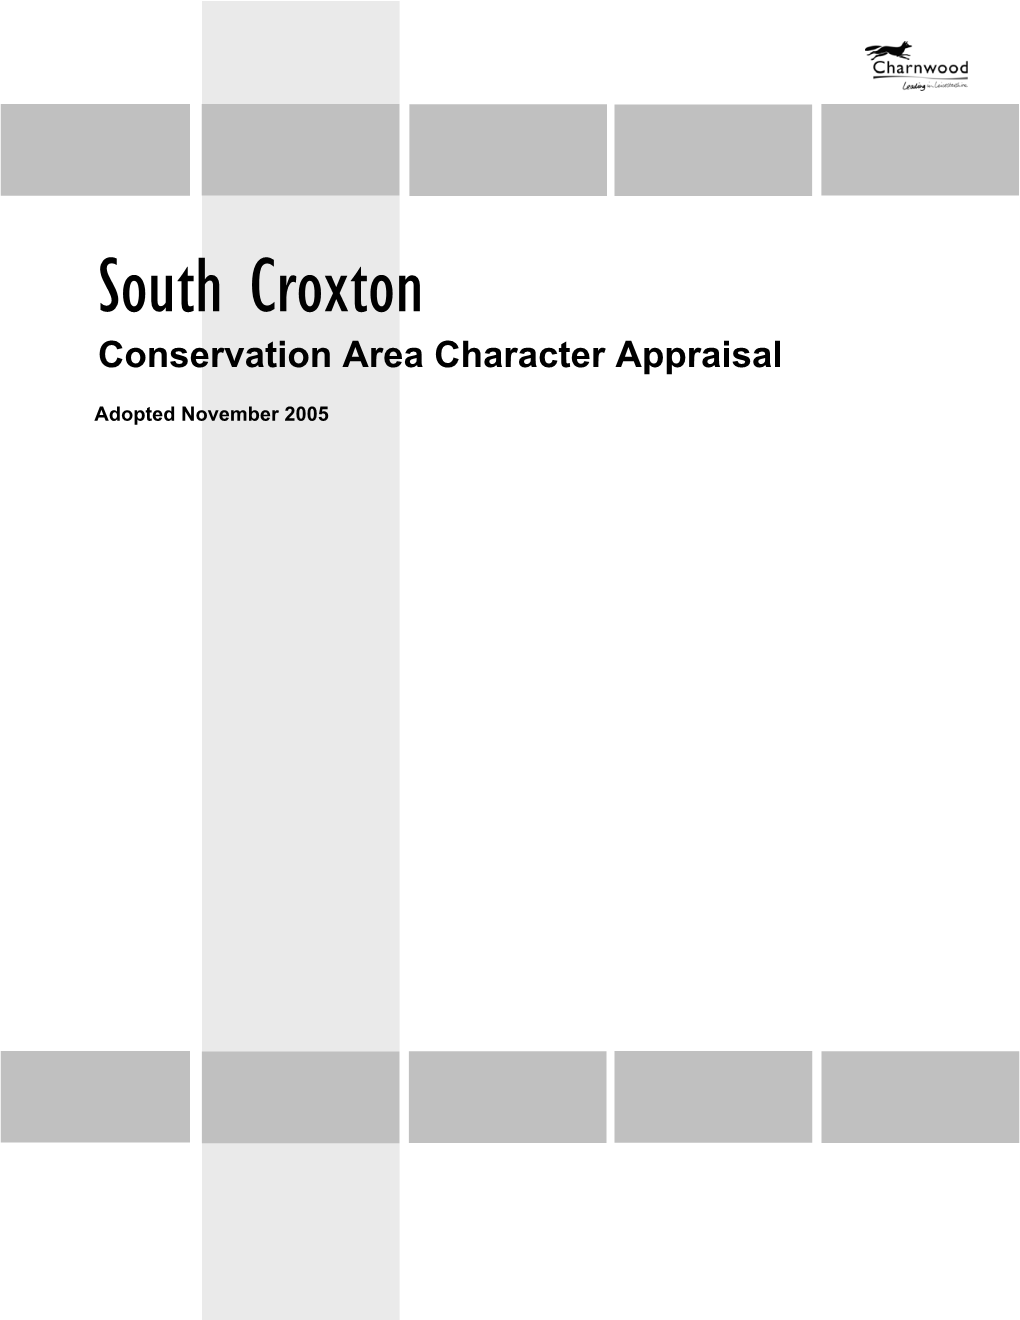 South Croxton Conservation Area Character Appraisal Adopted November 2005